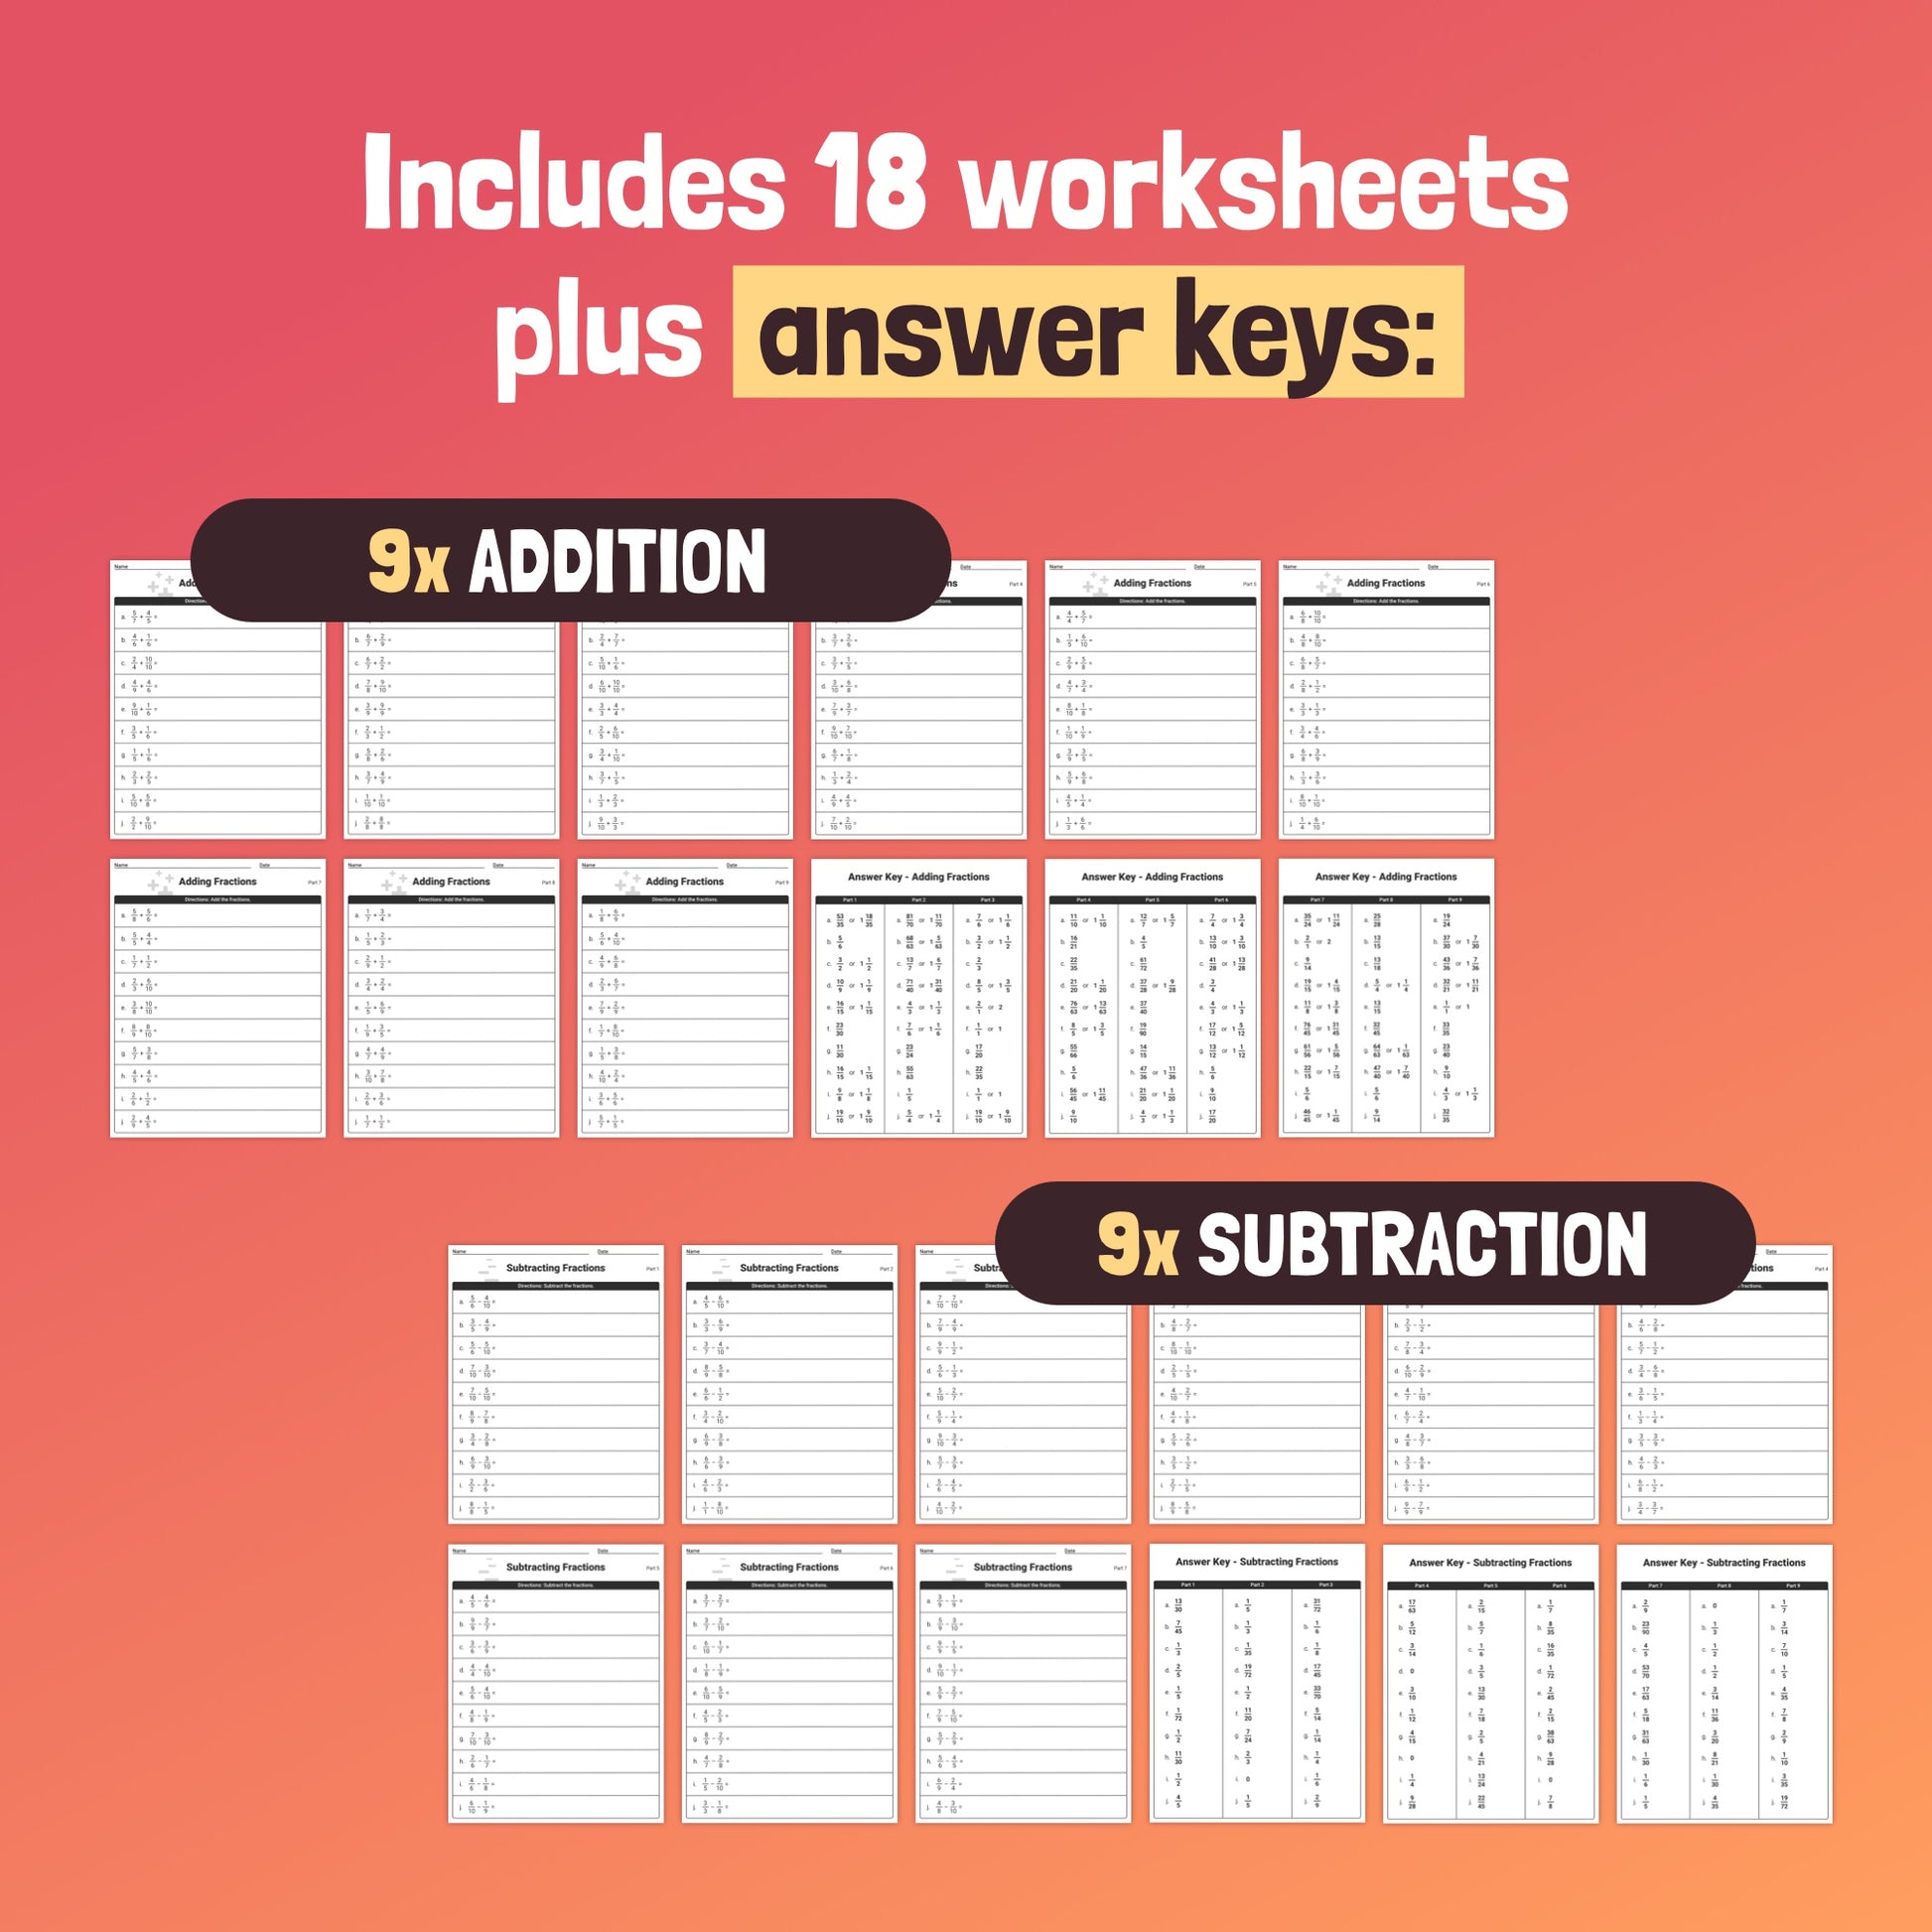 Fraction drills and answer keys